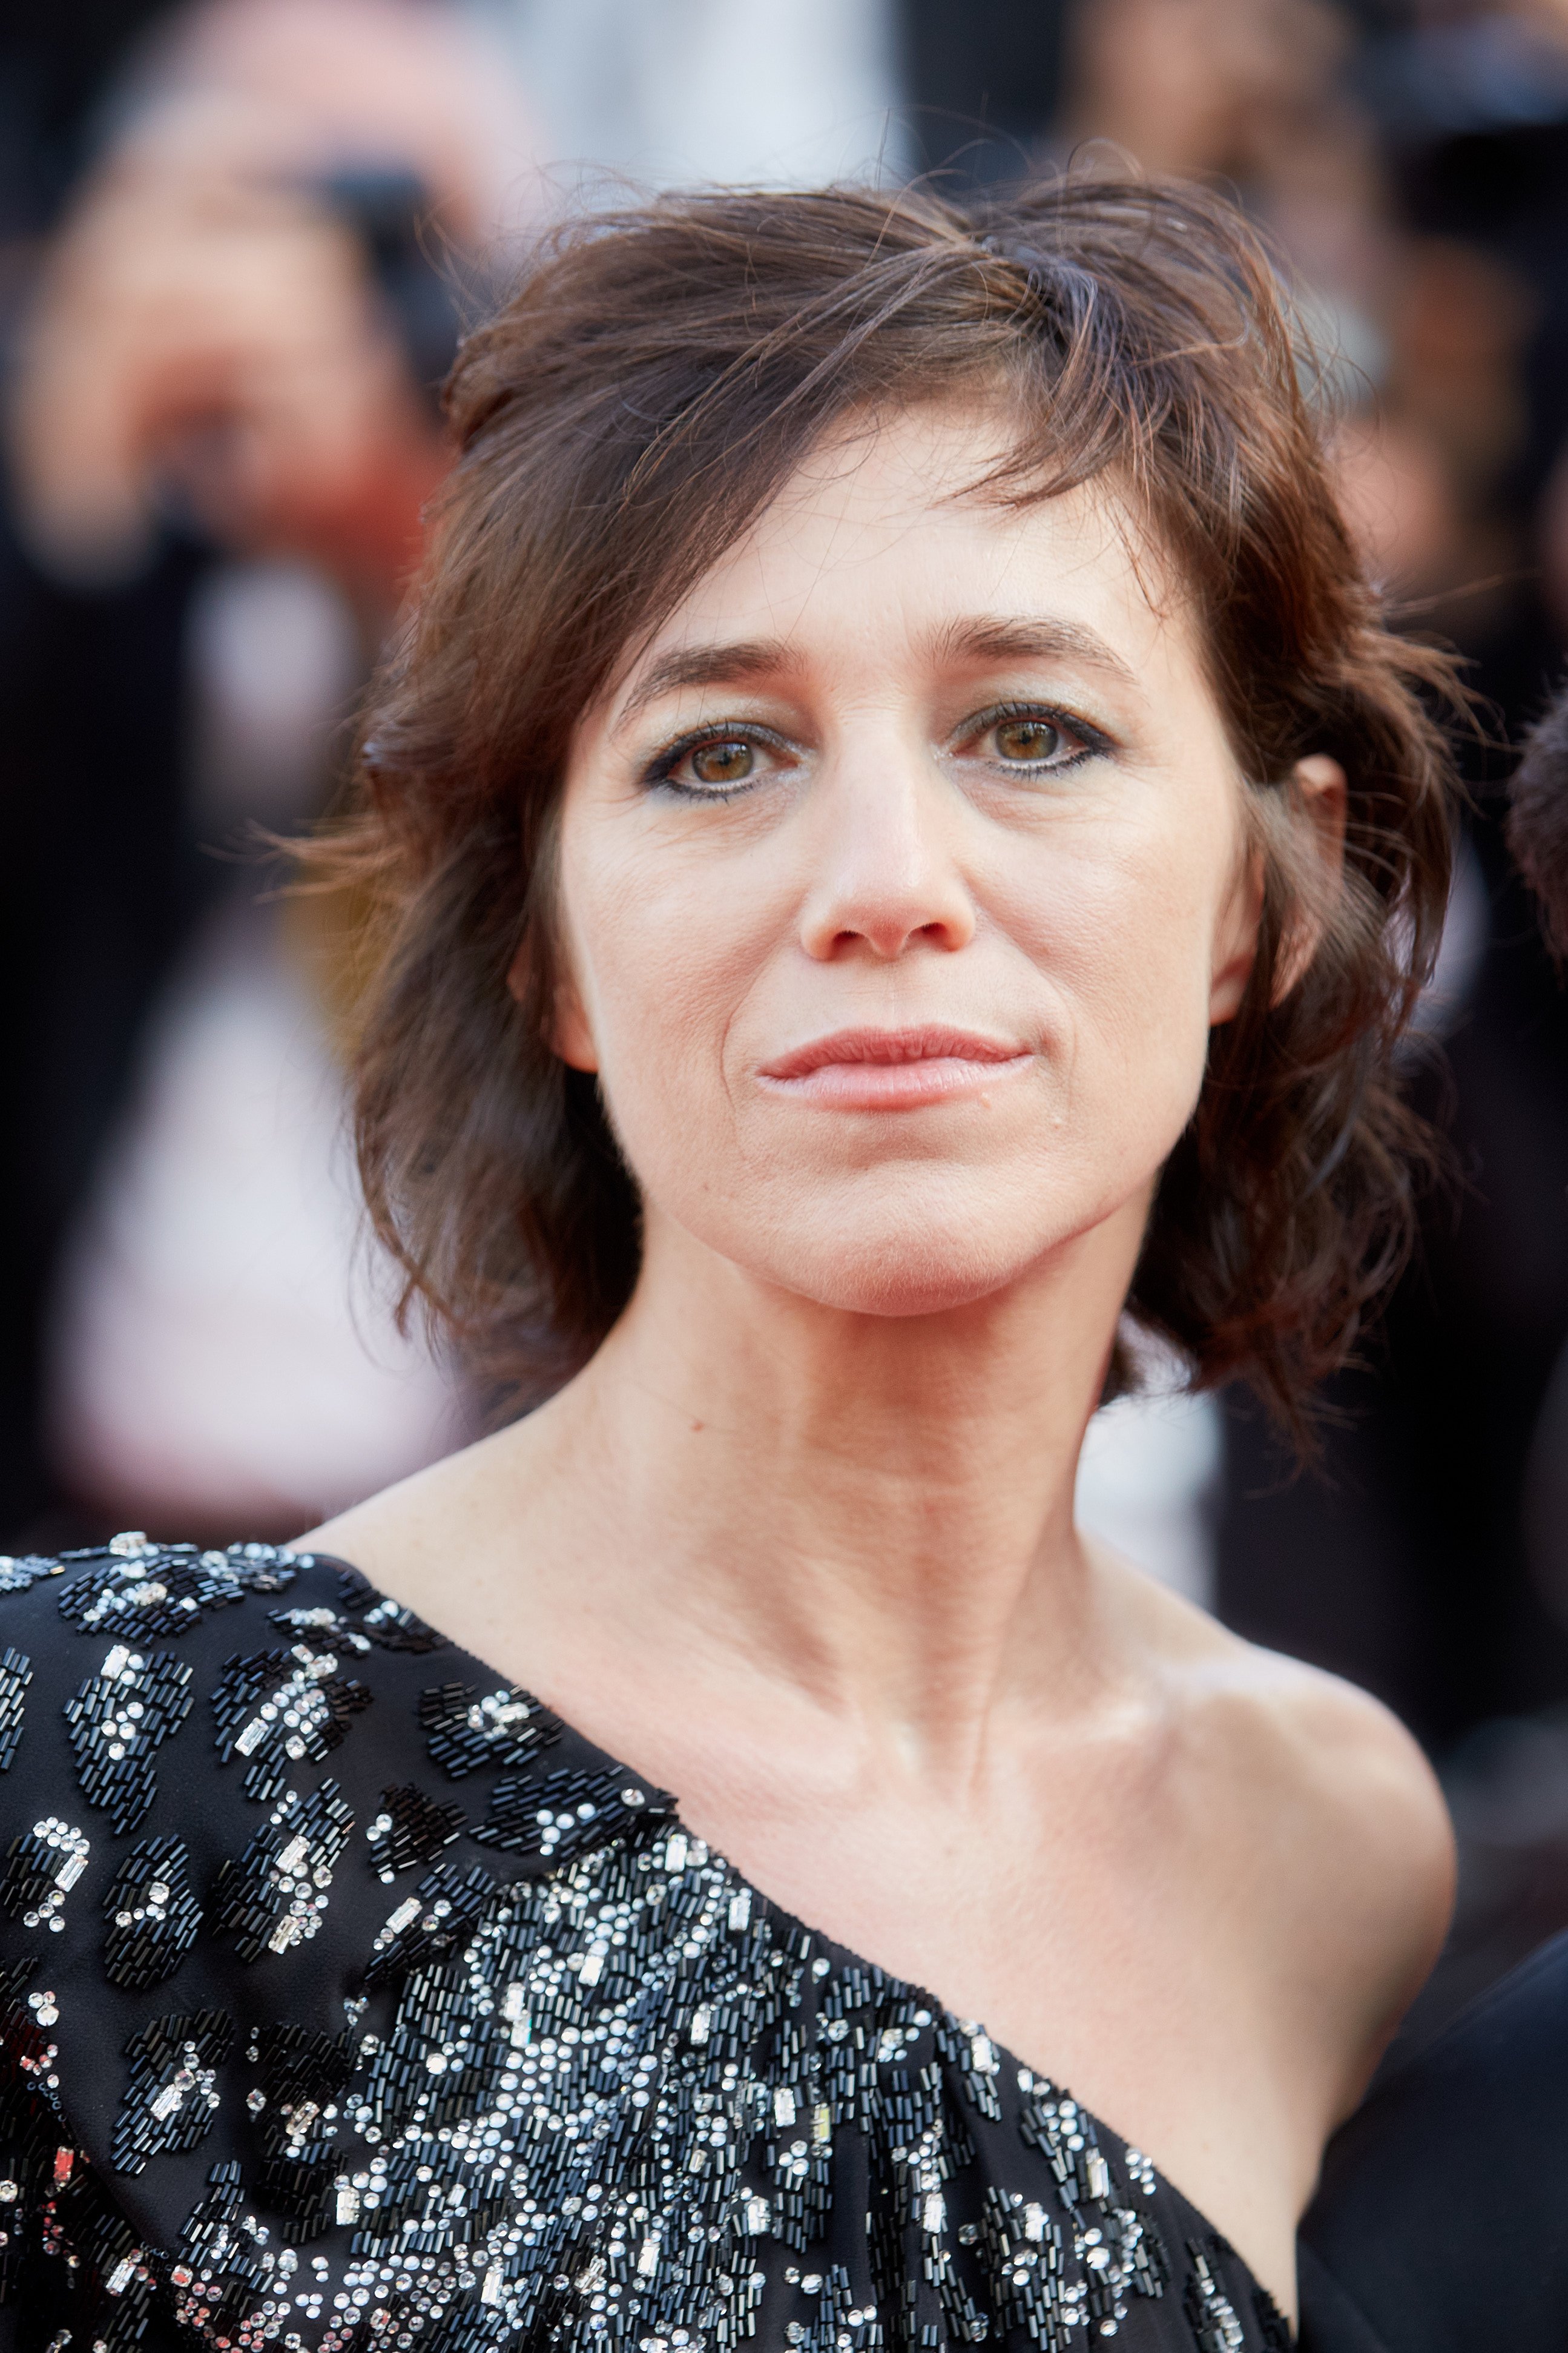 L'actrice Charlotte Gainsbourg | photo : Getty Images